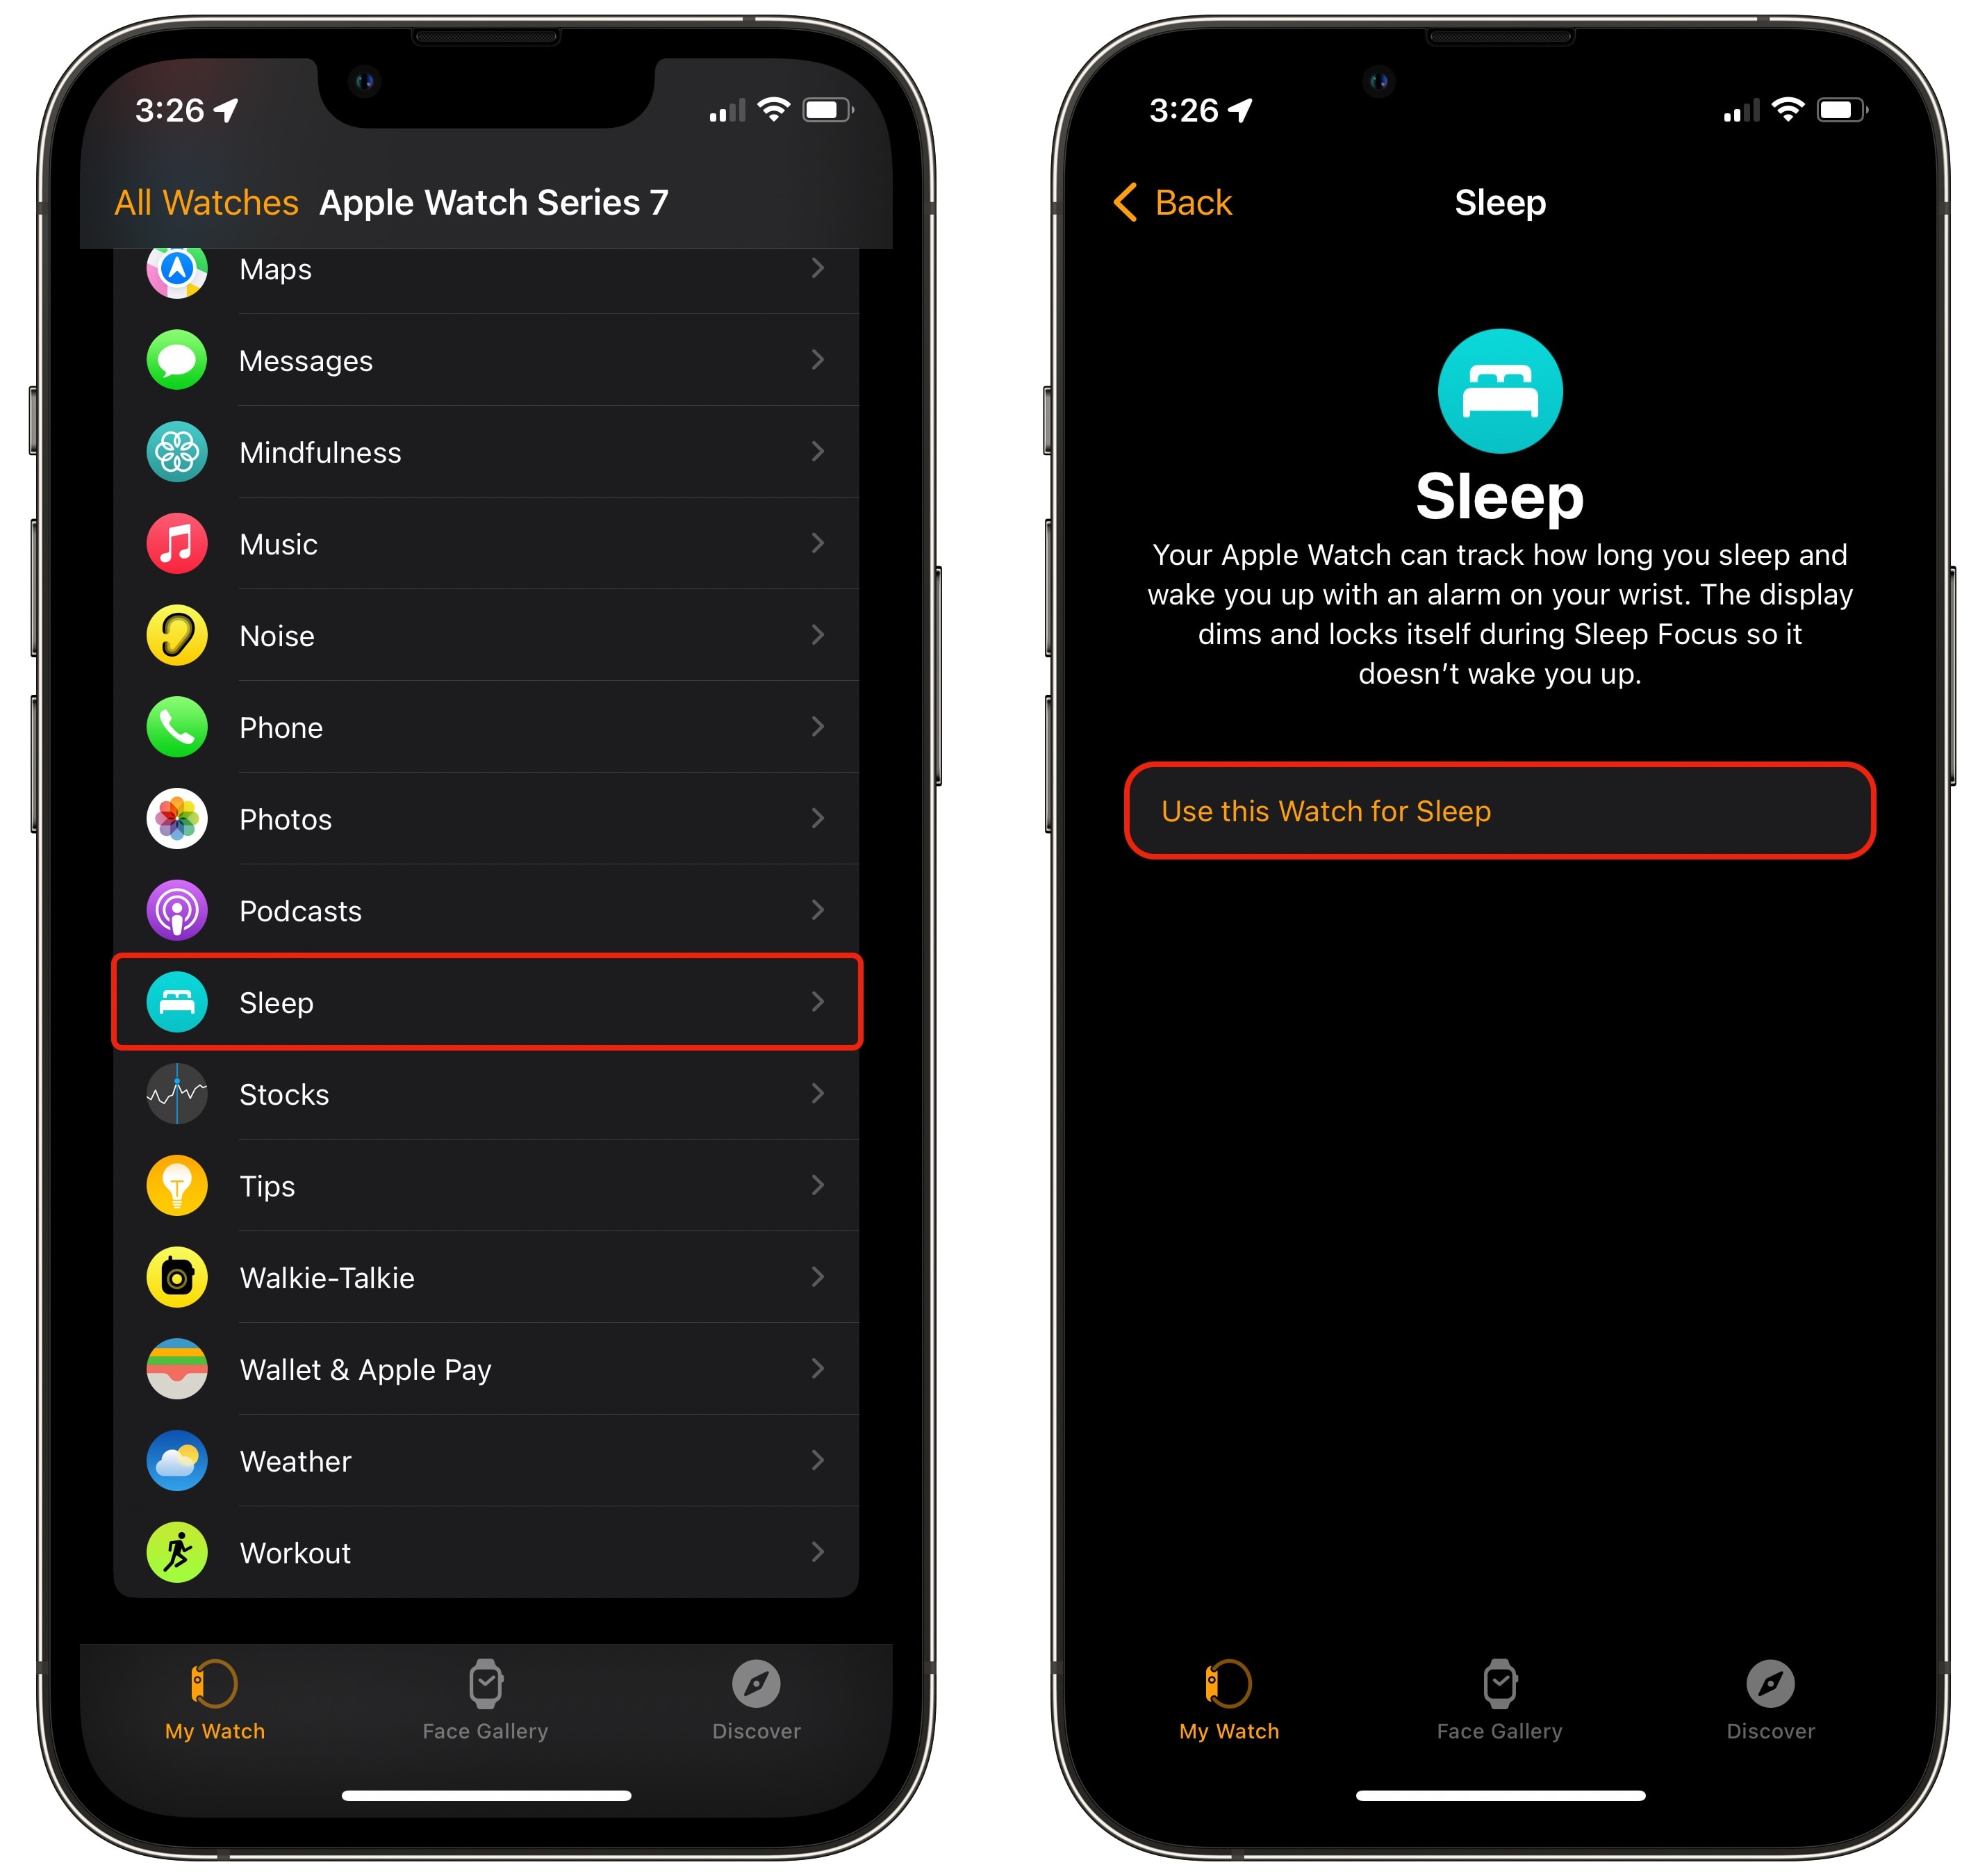 Turning on advance Sleep tracking for Apple Watch is easy.